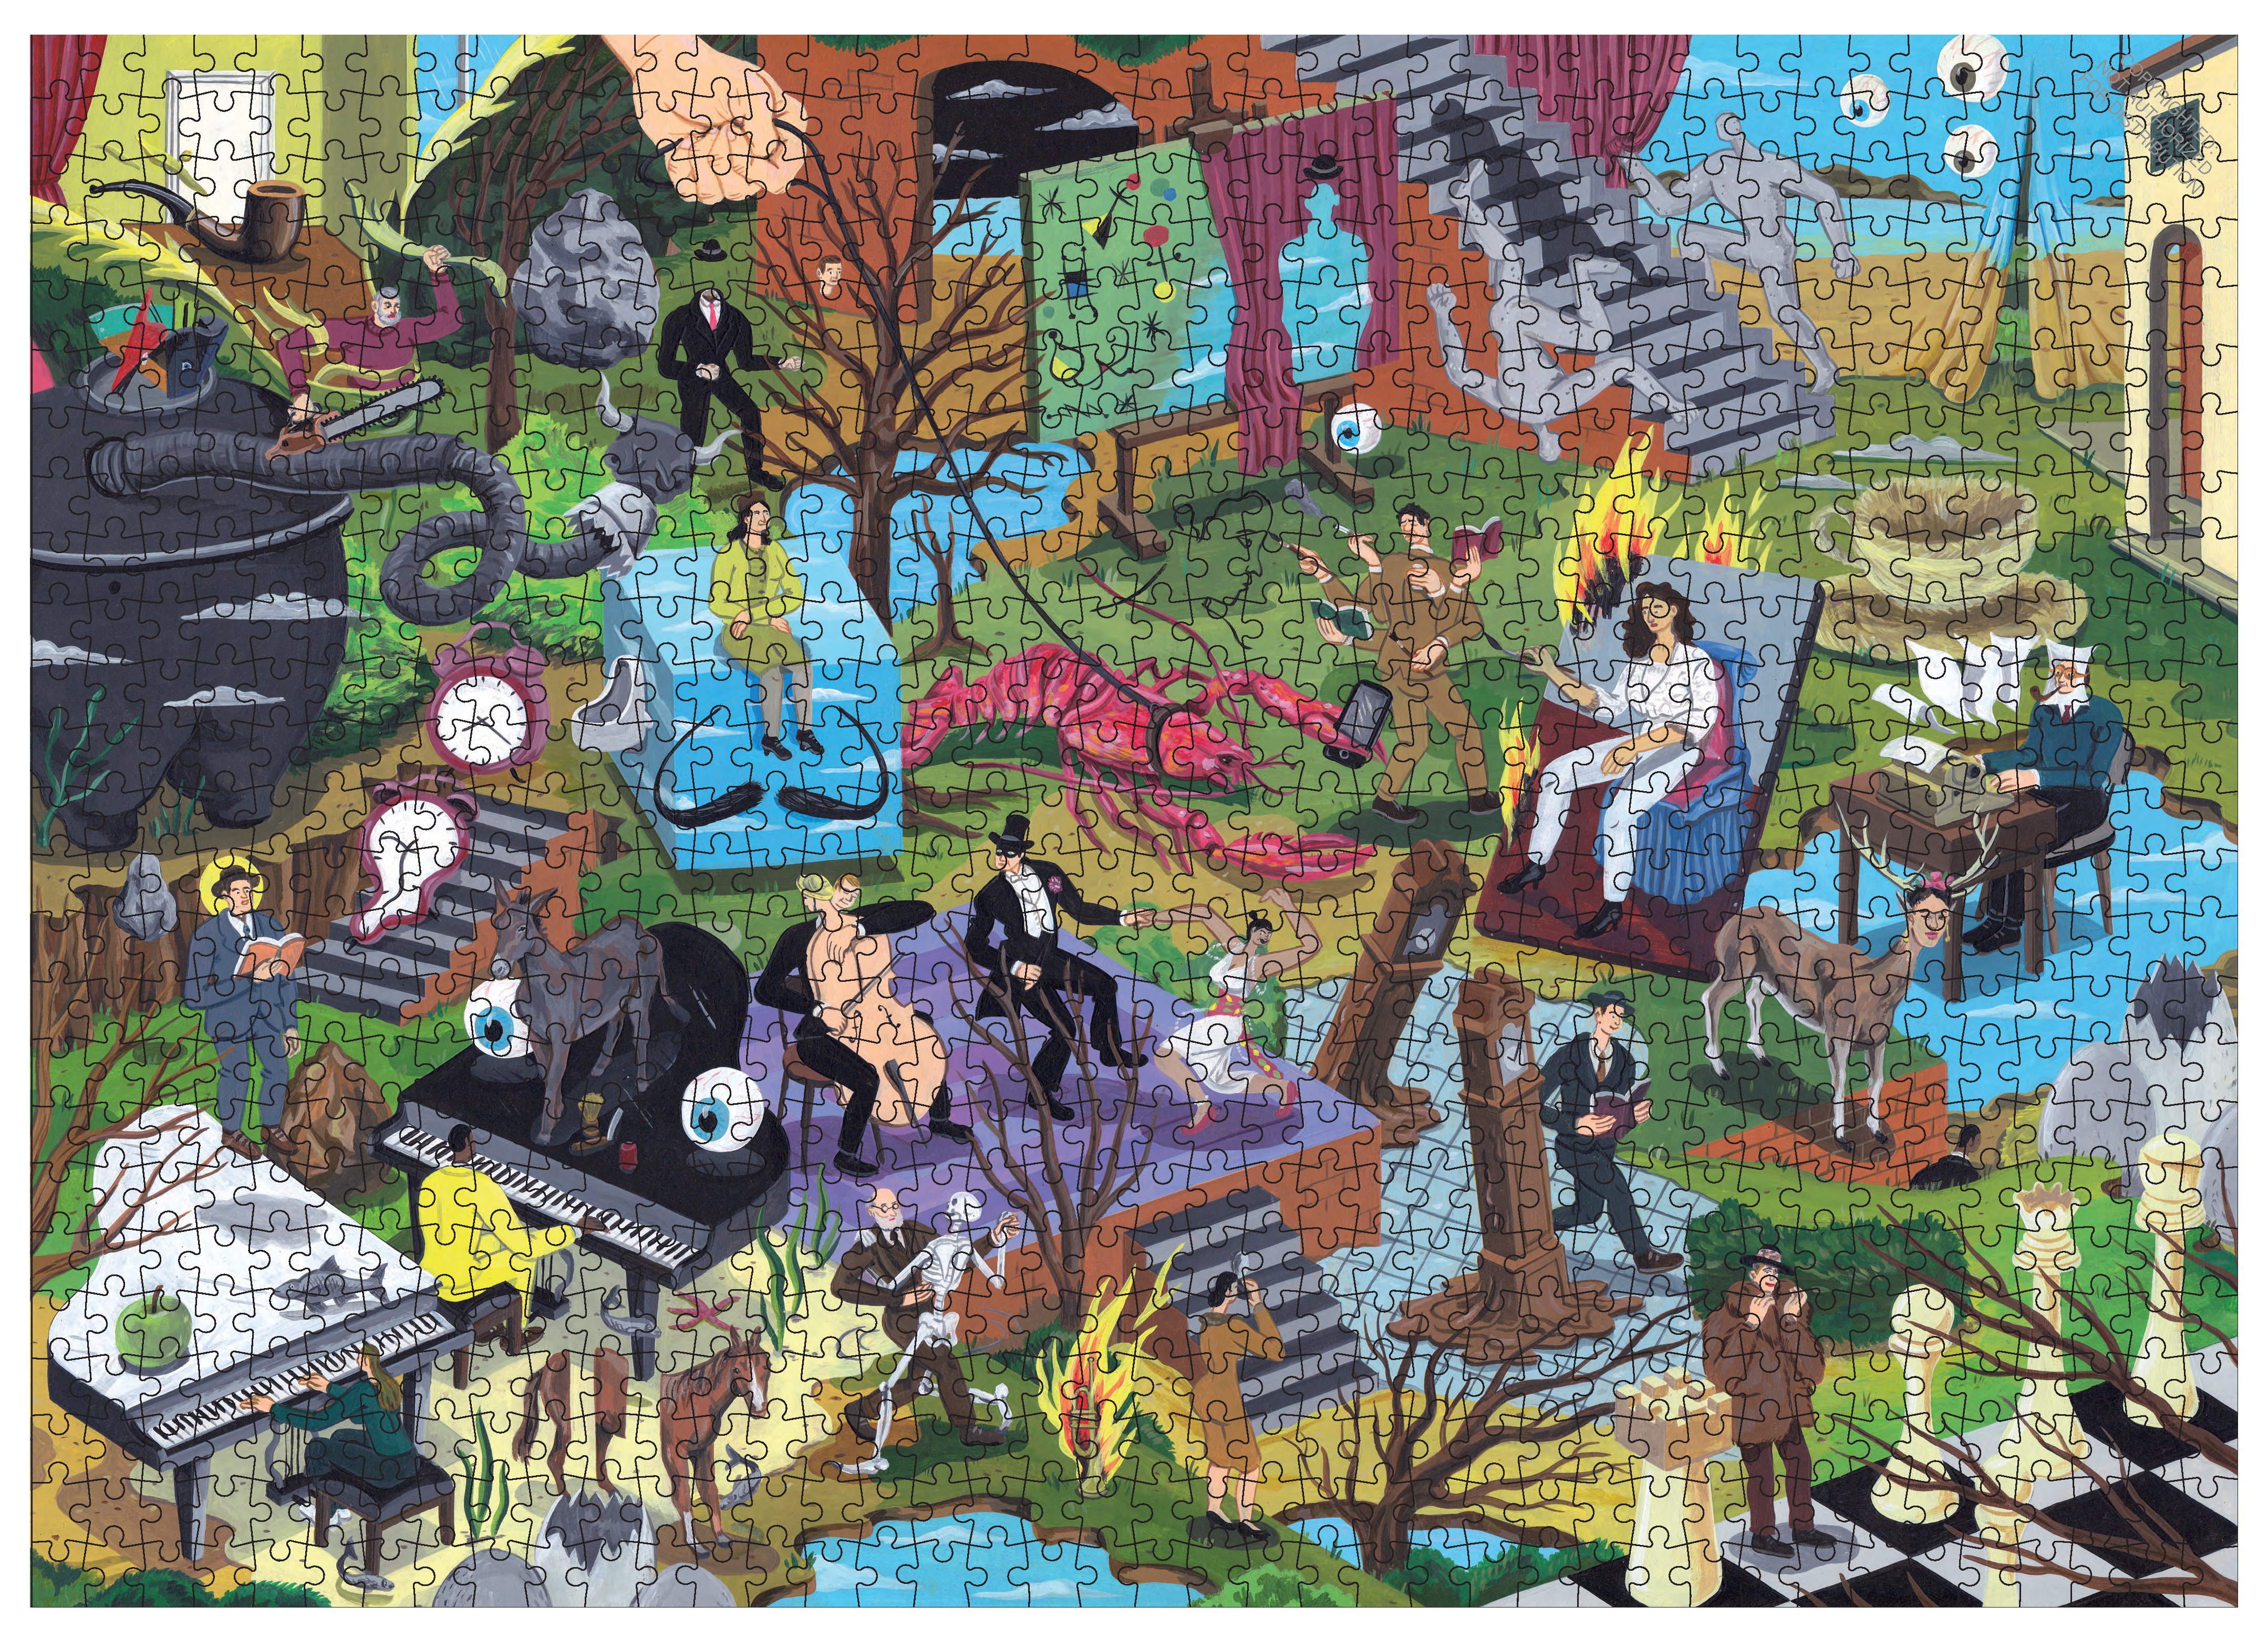 The Dream of Surrealism (1000-Piece Art History Jigsaw Puzzle)